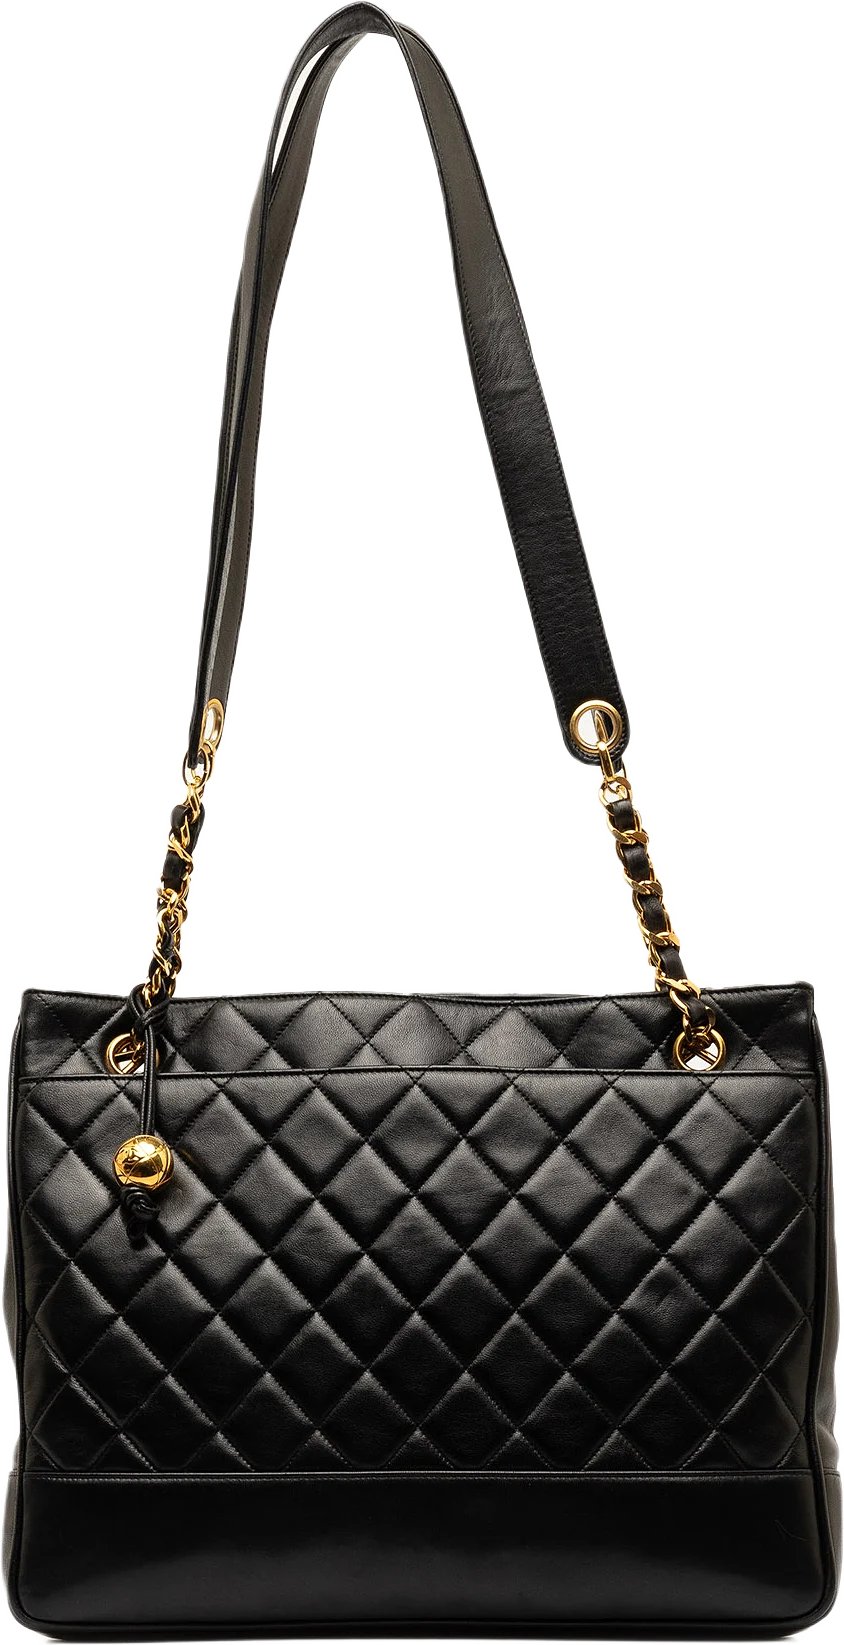 Chanel Quilted Lambskin Tote